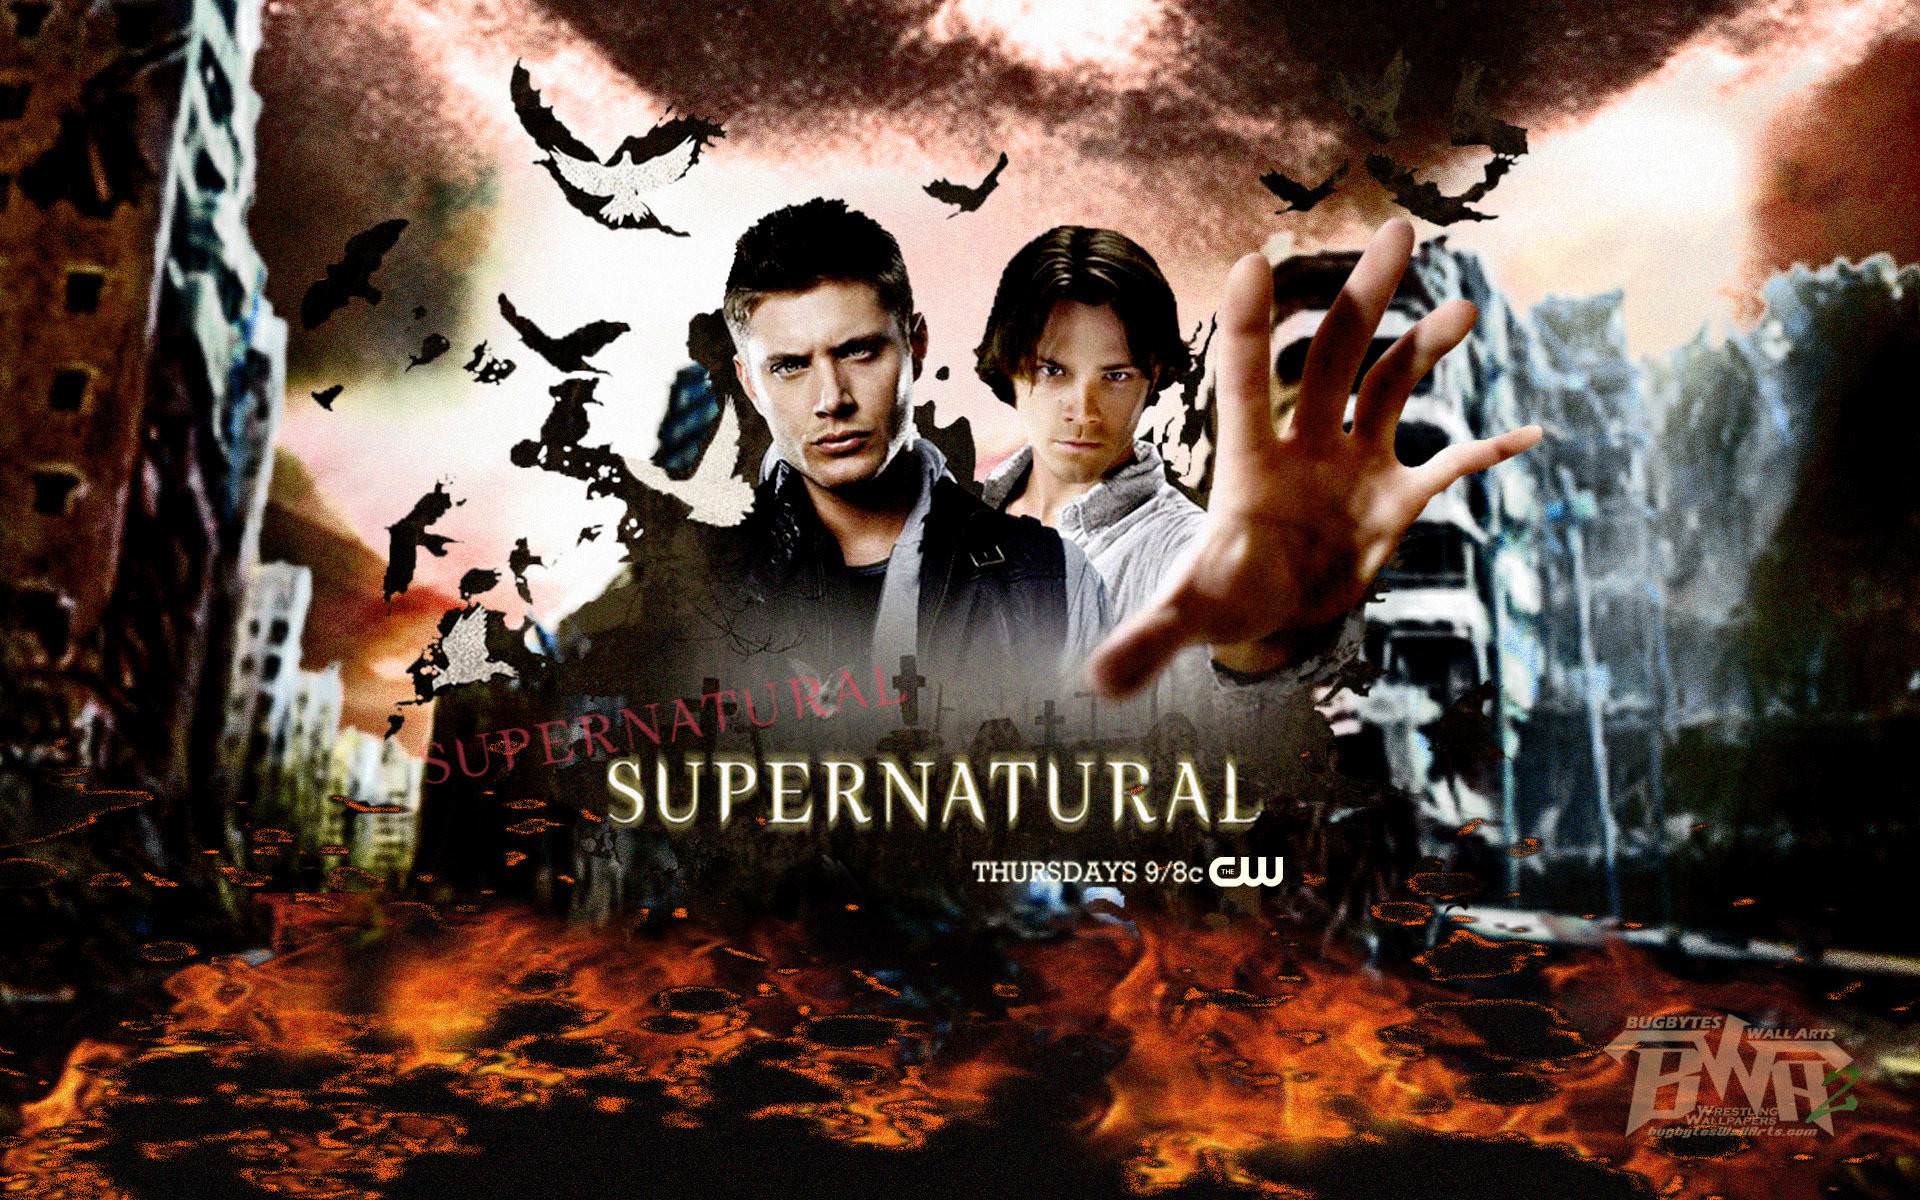 WLMW Supernatural Castiel Mobile Wallpaper Poster Decorative Painting  Canvas Wall Art Living Room Poster Bedroom Painting 08 x 12 Inches 20 x 30  cm  Amazonde Home  Kitchen